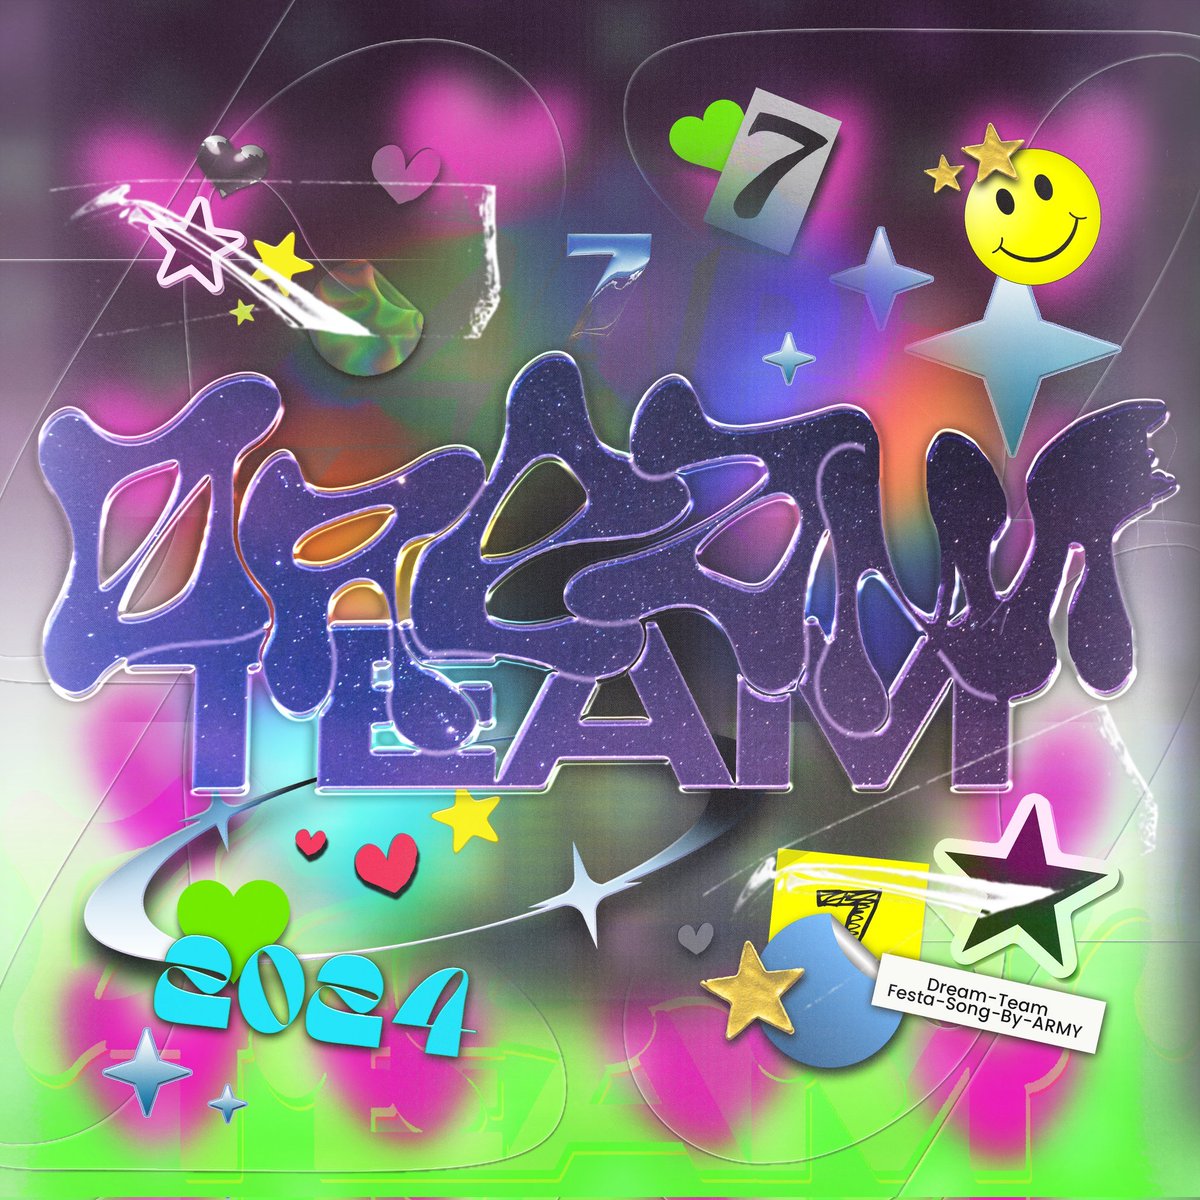 DREAM TEAM MAIN TRACK COVER IS HERE!
#FestaSongByArmy2024  

Amazingly crafted by our designers, the cover shows a cool R&B Pop vibe that depicts the song theme perfectly!💜 

MV RELEASE  - 13th June, 2 AM KST (subtitles in multiple languages)
#DreamTeamByArmy #BTS11thAnniversary